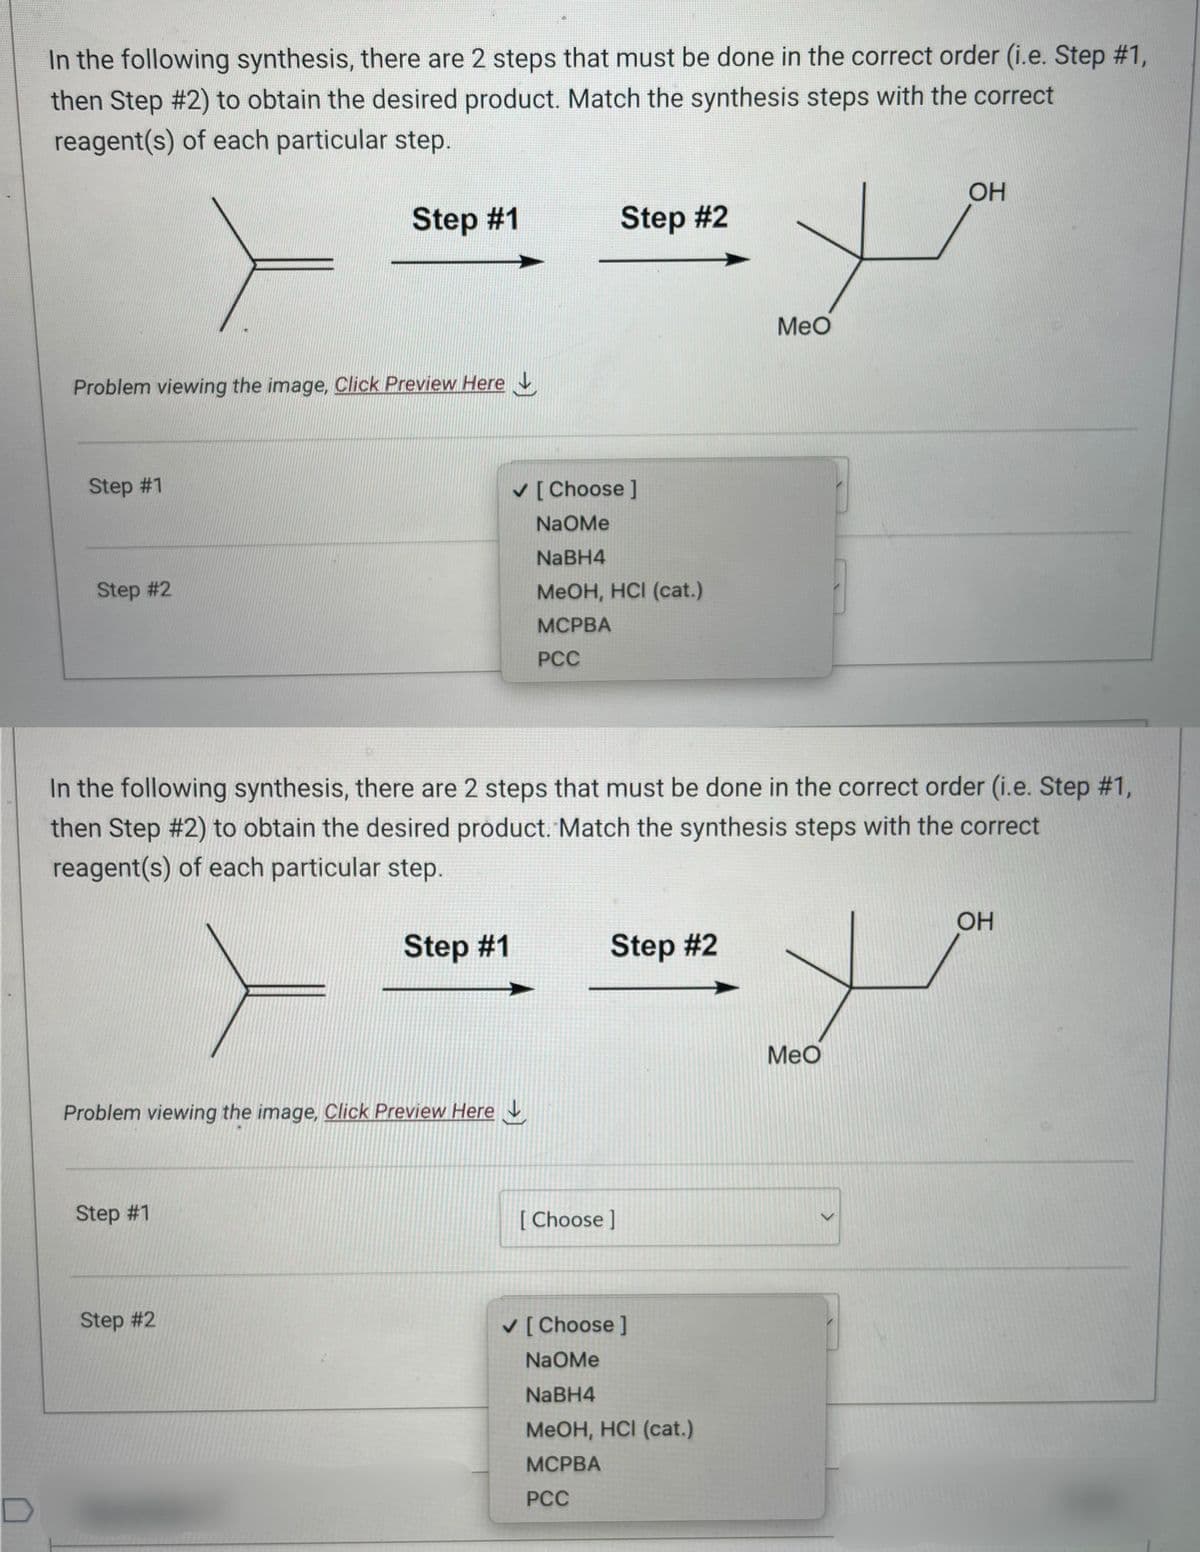 In the following synthesis, there are 2 steps that must be done in the correct order (i.e. Step #1,
then Step #2) to obtain the desired product. Match the synthesis steps with the correct
reagent(s) of each particular step.
Problem viewing the image. Click Preview Here
Step #1
Step #2
Step #1
Problem viewing the image, Click Preview Here
Step #1
Step #2
Step #2
✓ [Choose ]
NaOMe
NaBH4
MeOH, HCI (cat.)
MCPBA
PCC
In the following synthesis, there are 2 steps that must be done in the correct order (i.e. Step #1,
then Step #2) to obtain the desired product. Match the synthesis steps with the correct
reagent(s) of each particular step.
Step #1
Step #2
[Choose ]
OH
+
✓ [Choose ]
NaOMe
NaBH4
MeOH, HCI (cat.)
MCPBA
PCC
MeO
+
MeO
<
OH